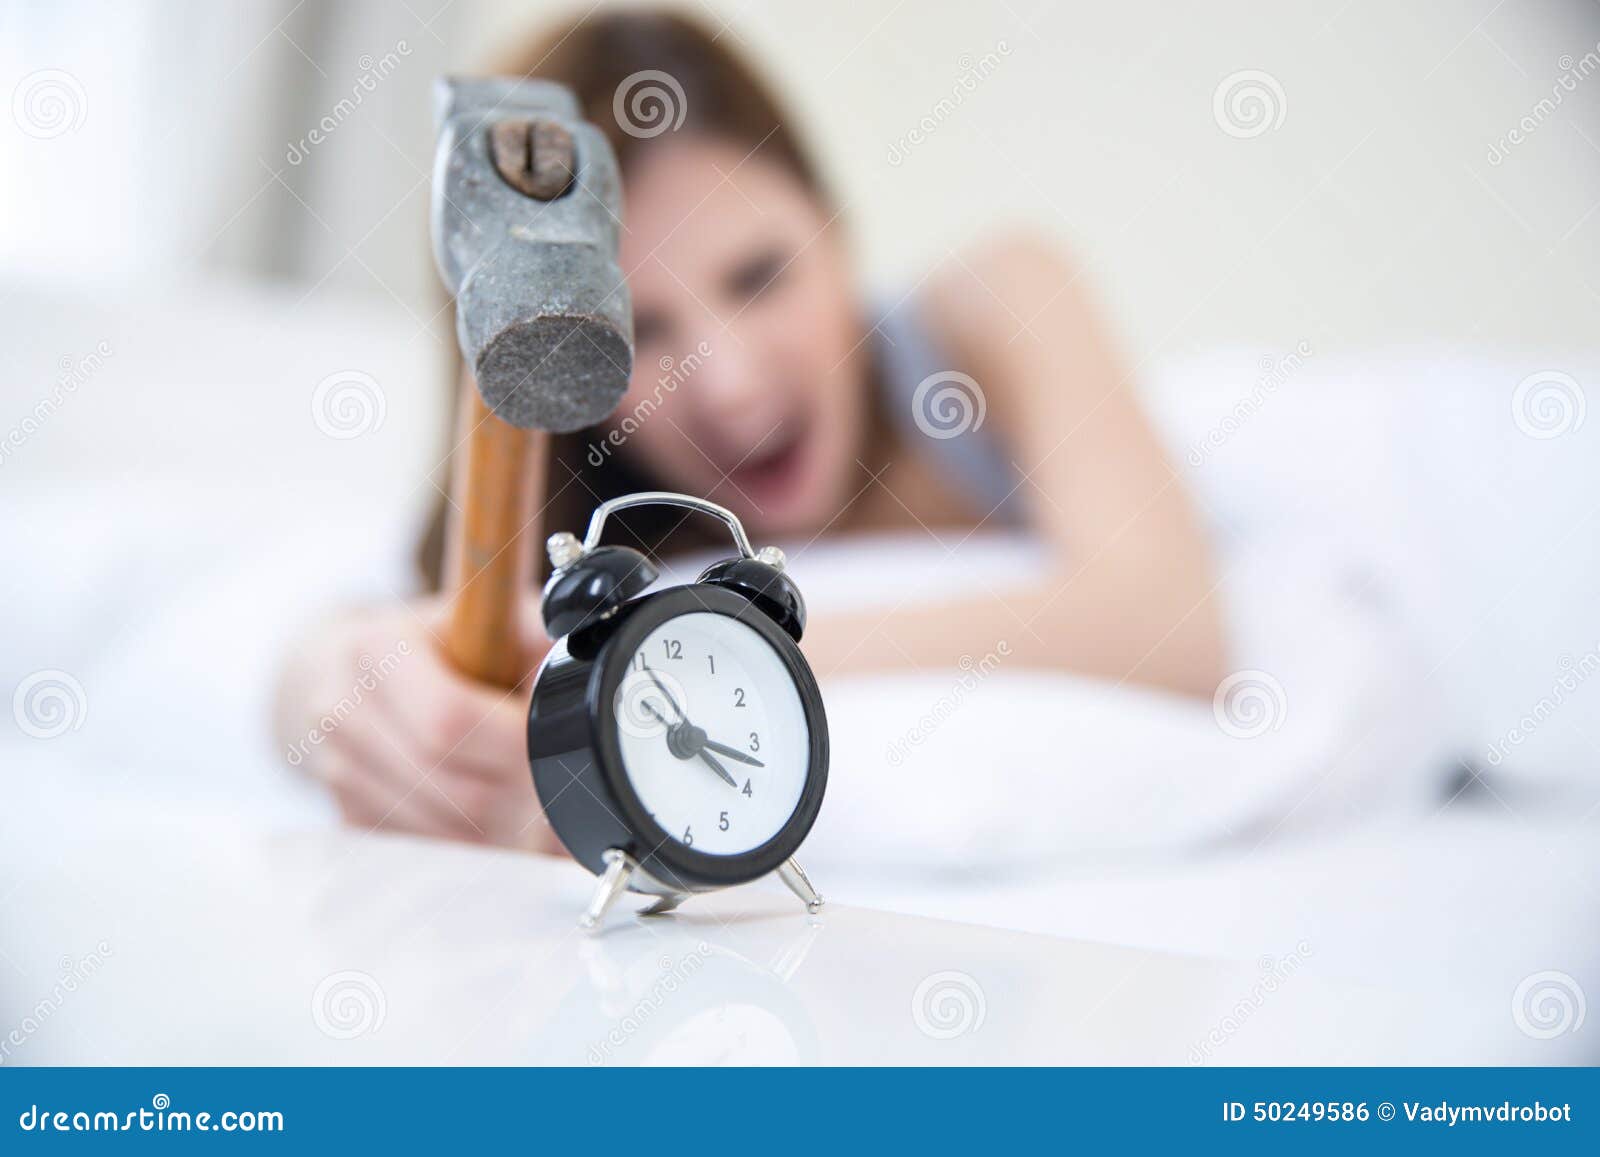 woman not wanting to get up